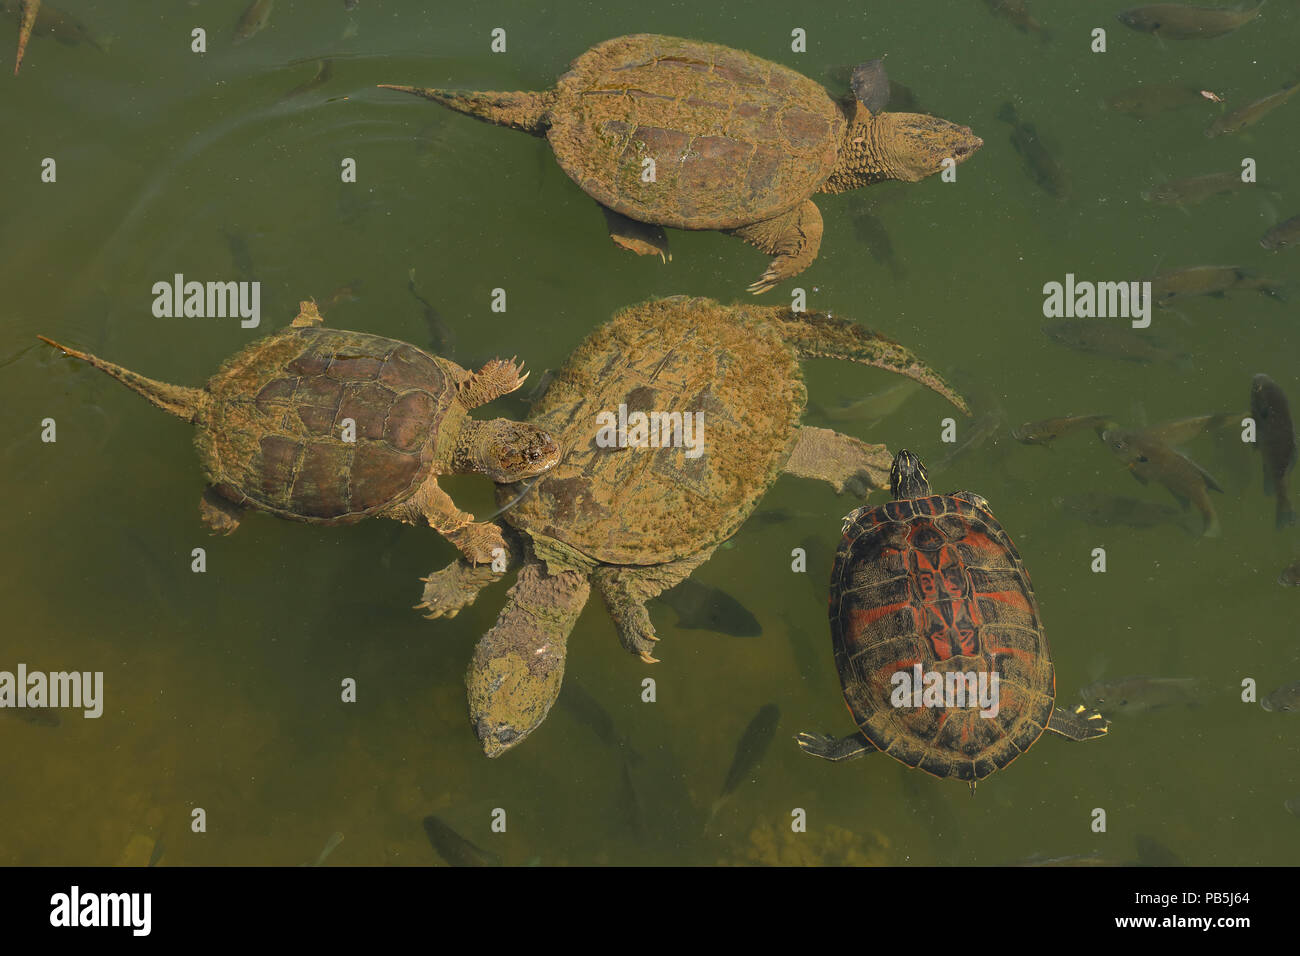 snapping turtles, Chelydra serpentina,  river cooter and Bluegills, Lepomis macrochirus, Maryland Stock Photo